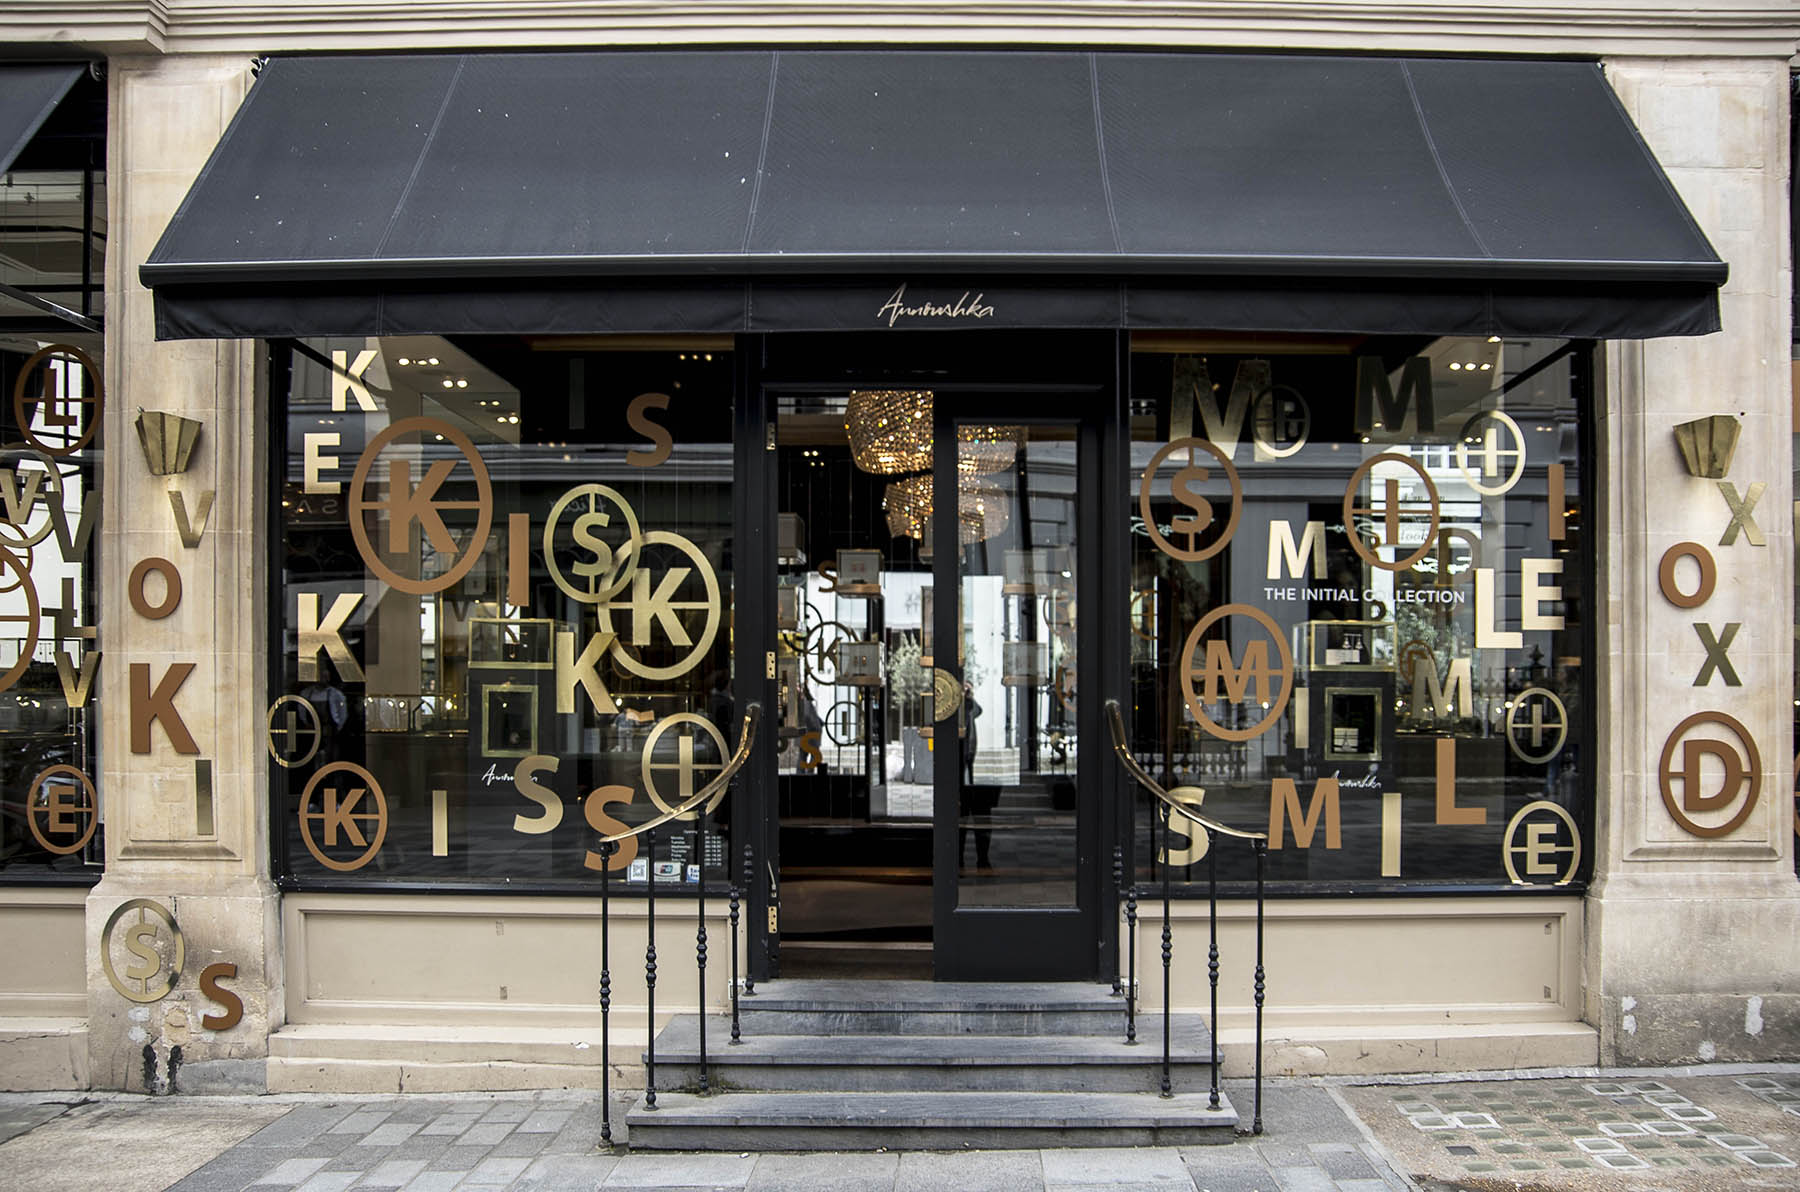 Annoushka Initials window display - gold and copper letters spelling Kiss and Smile